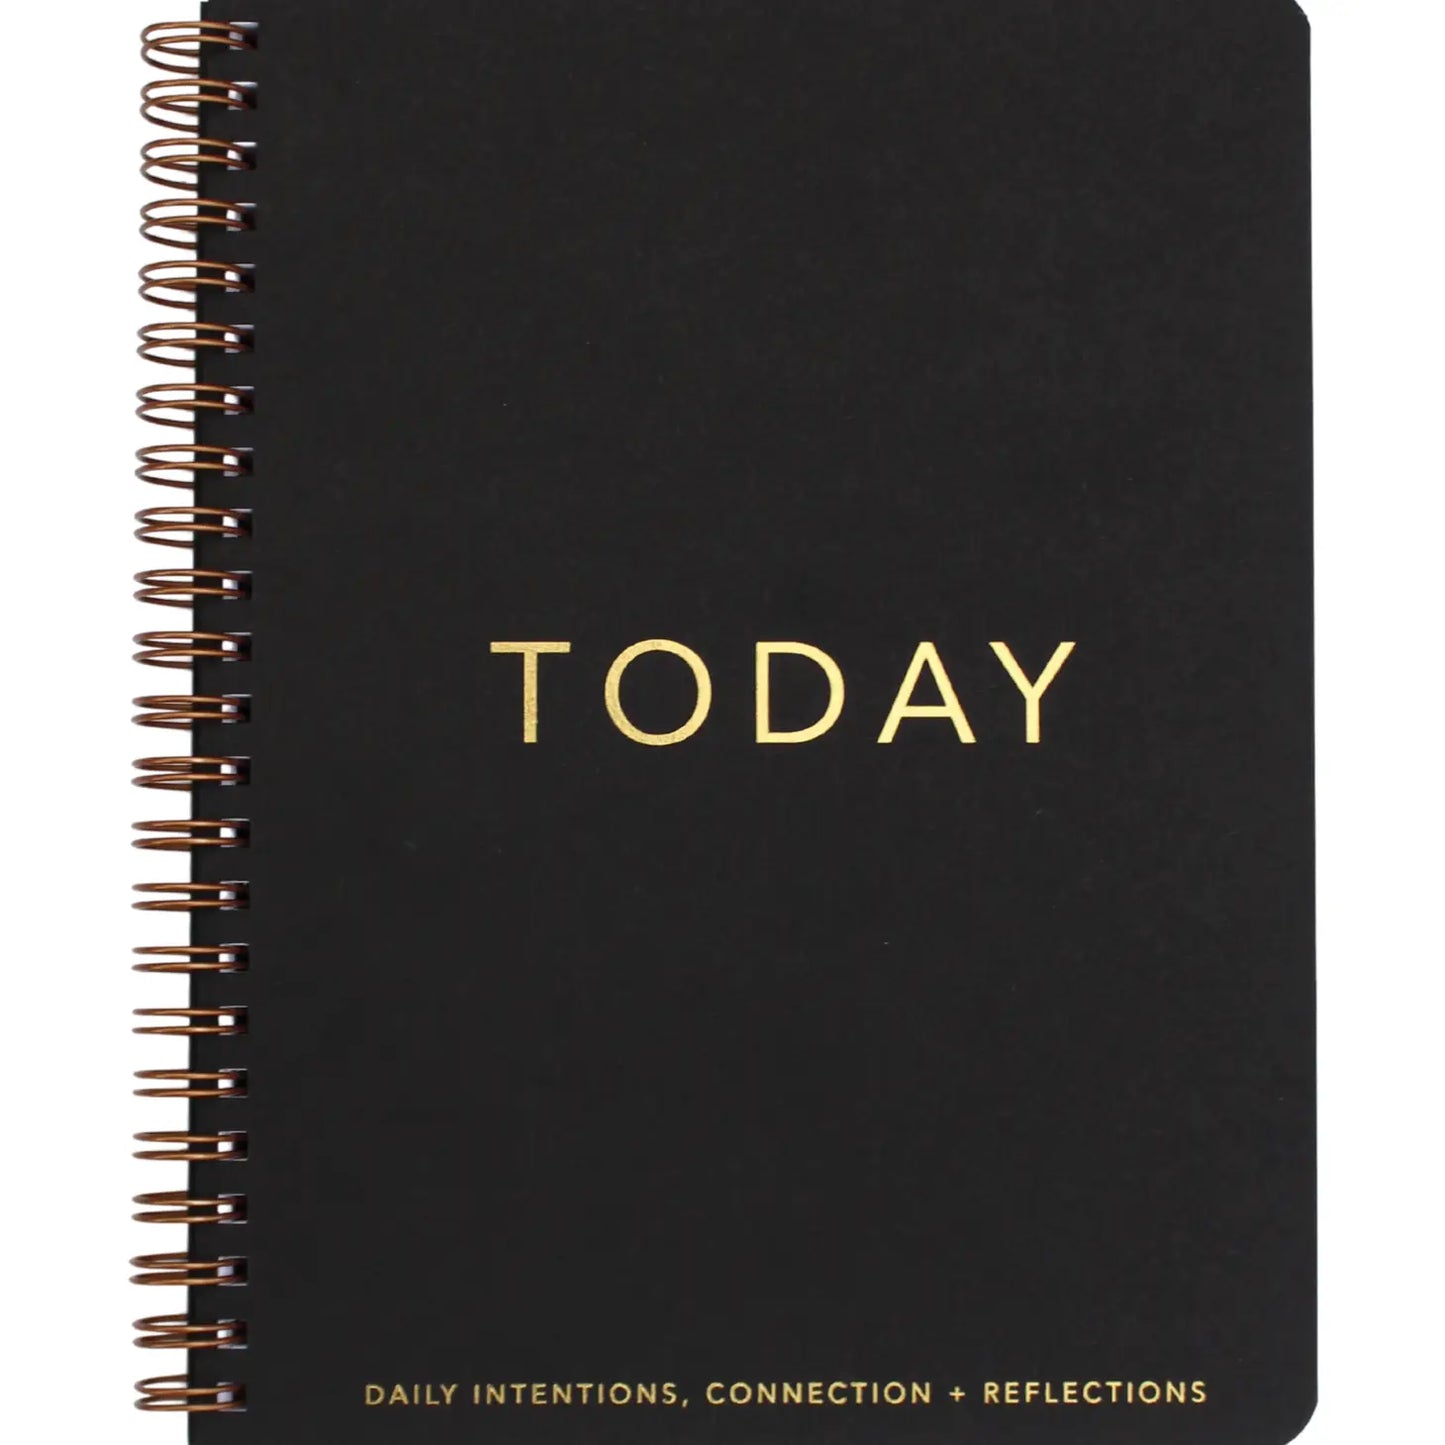 Your Joyologist A Daily Collection + Intention + Reflection Journal - Today - Black Cover available at The Good Life Boutique